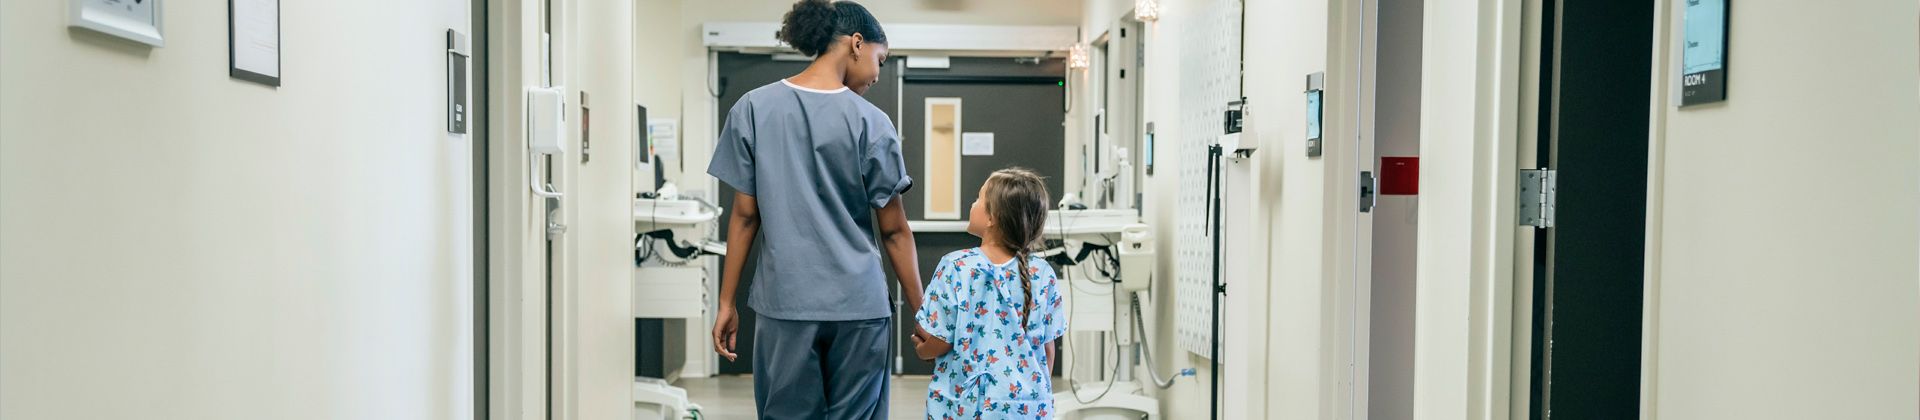 A woman in scrubs looks down at a young girl patient while they walk down a hospital hall